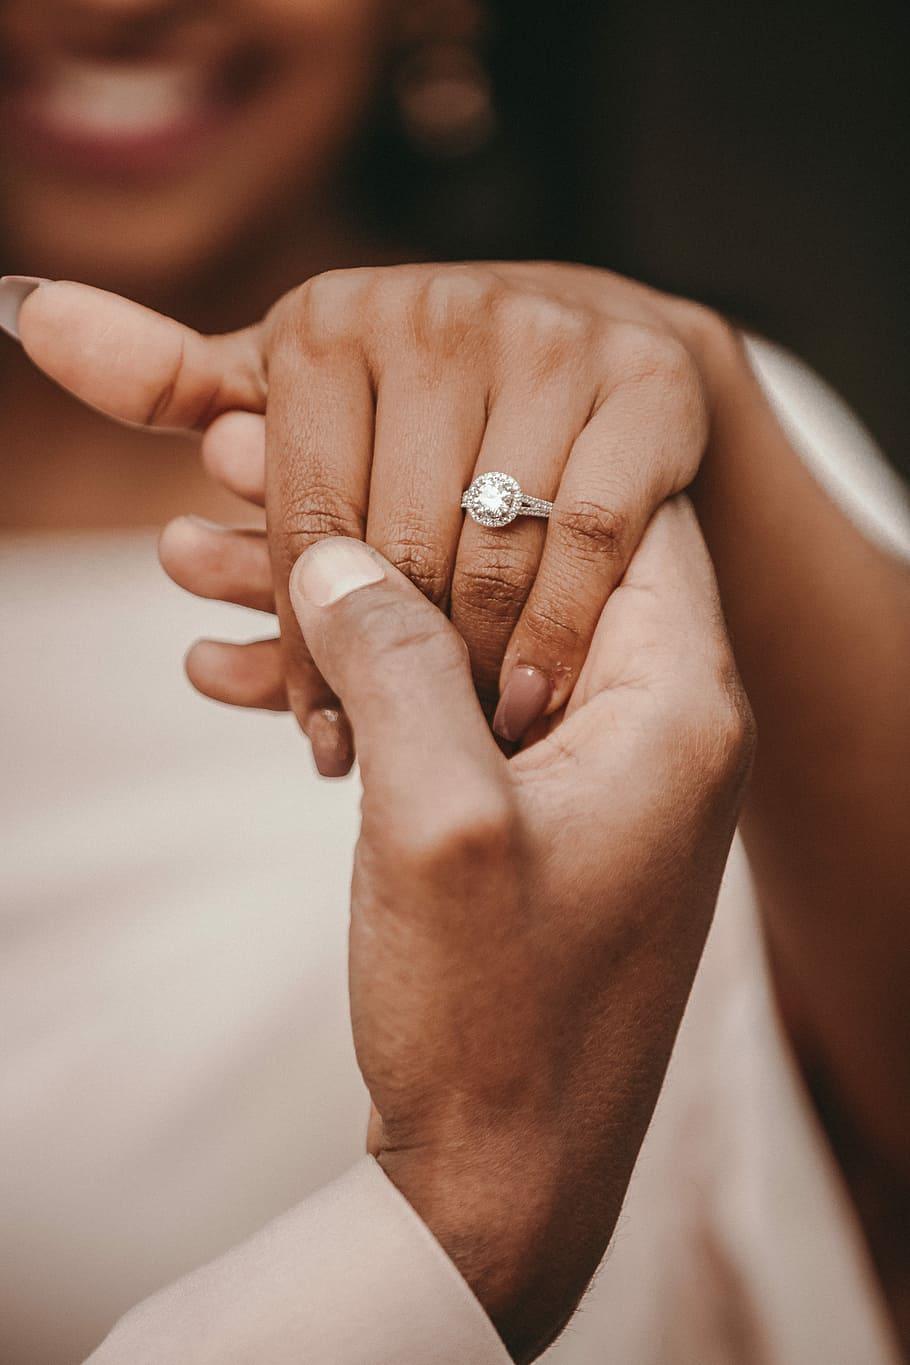 HD wallpaper: couple holding hands, person holding hand of woman with ring